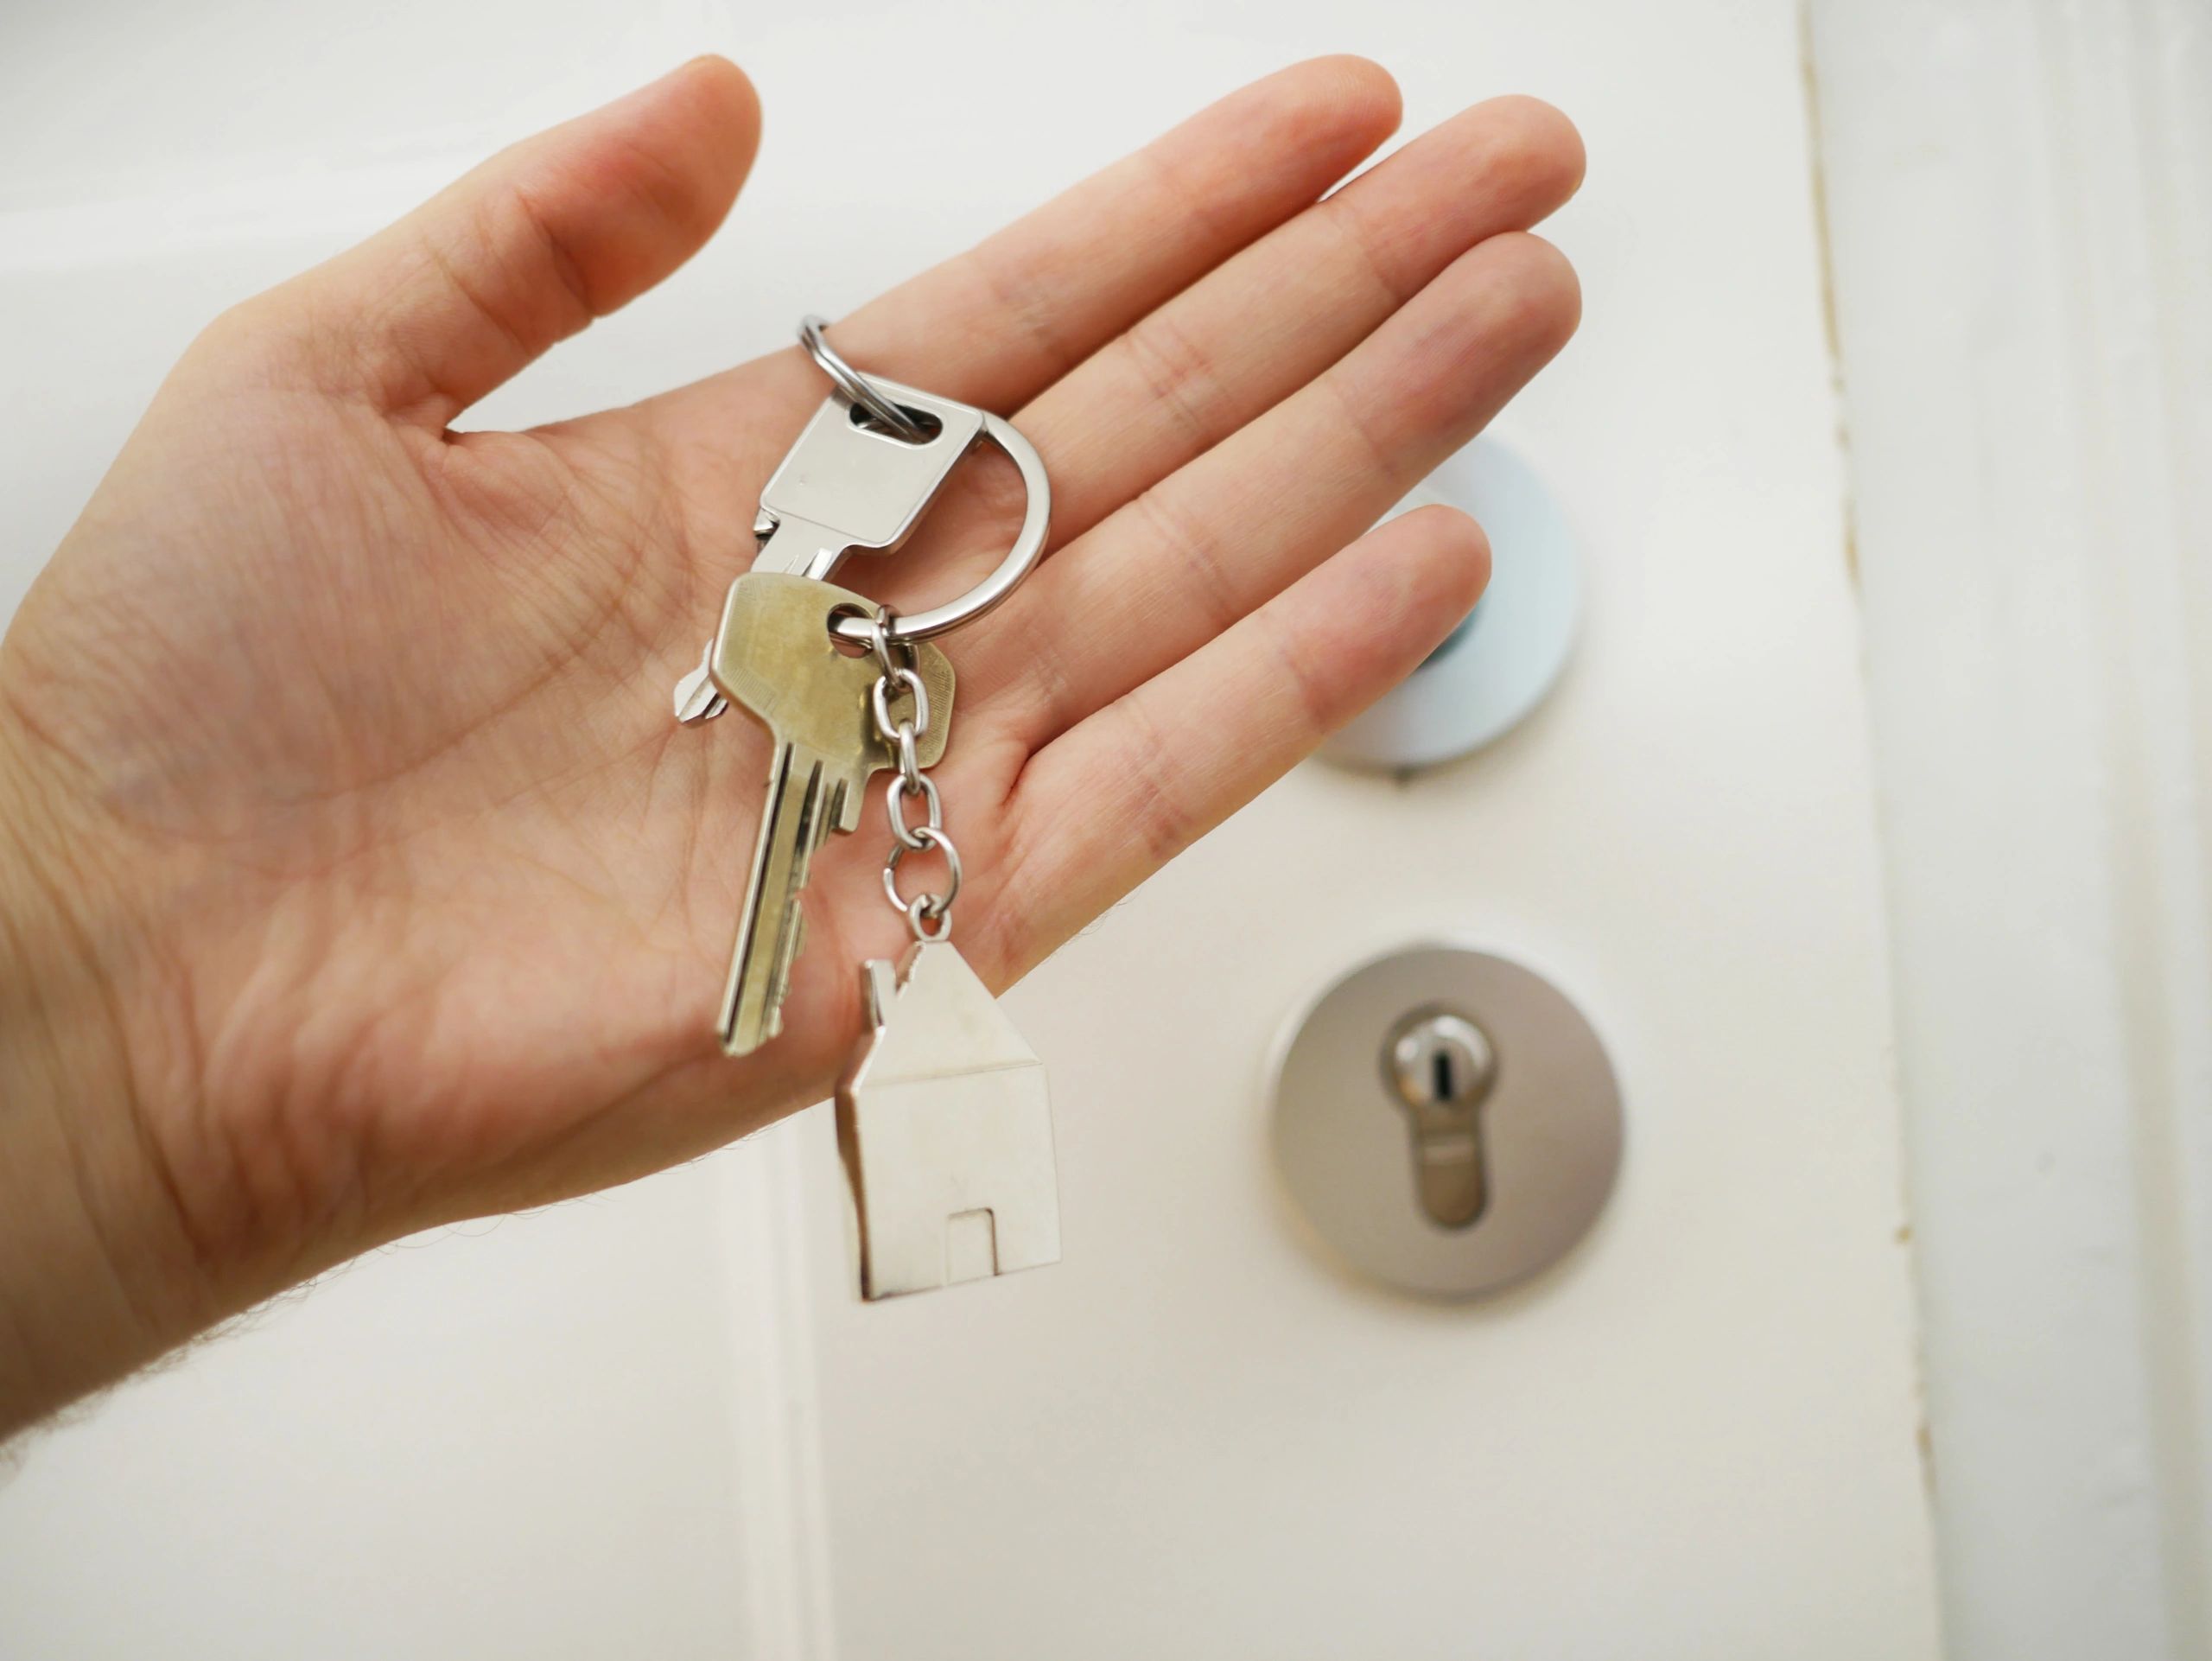 Image of a hand holding house keys.